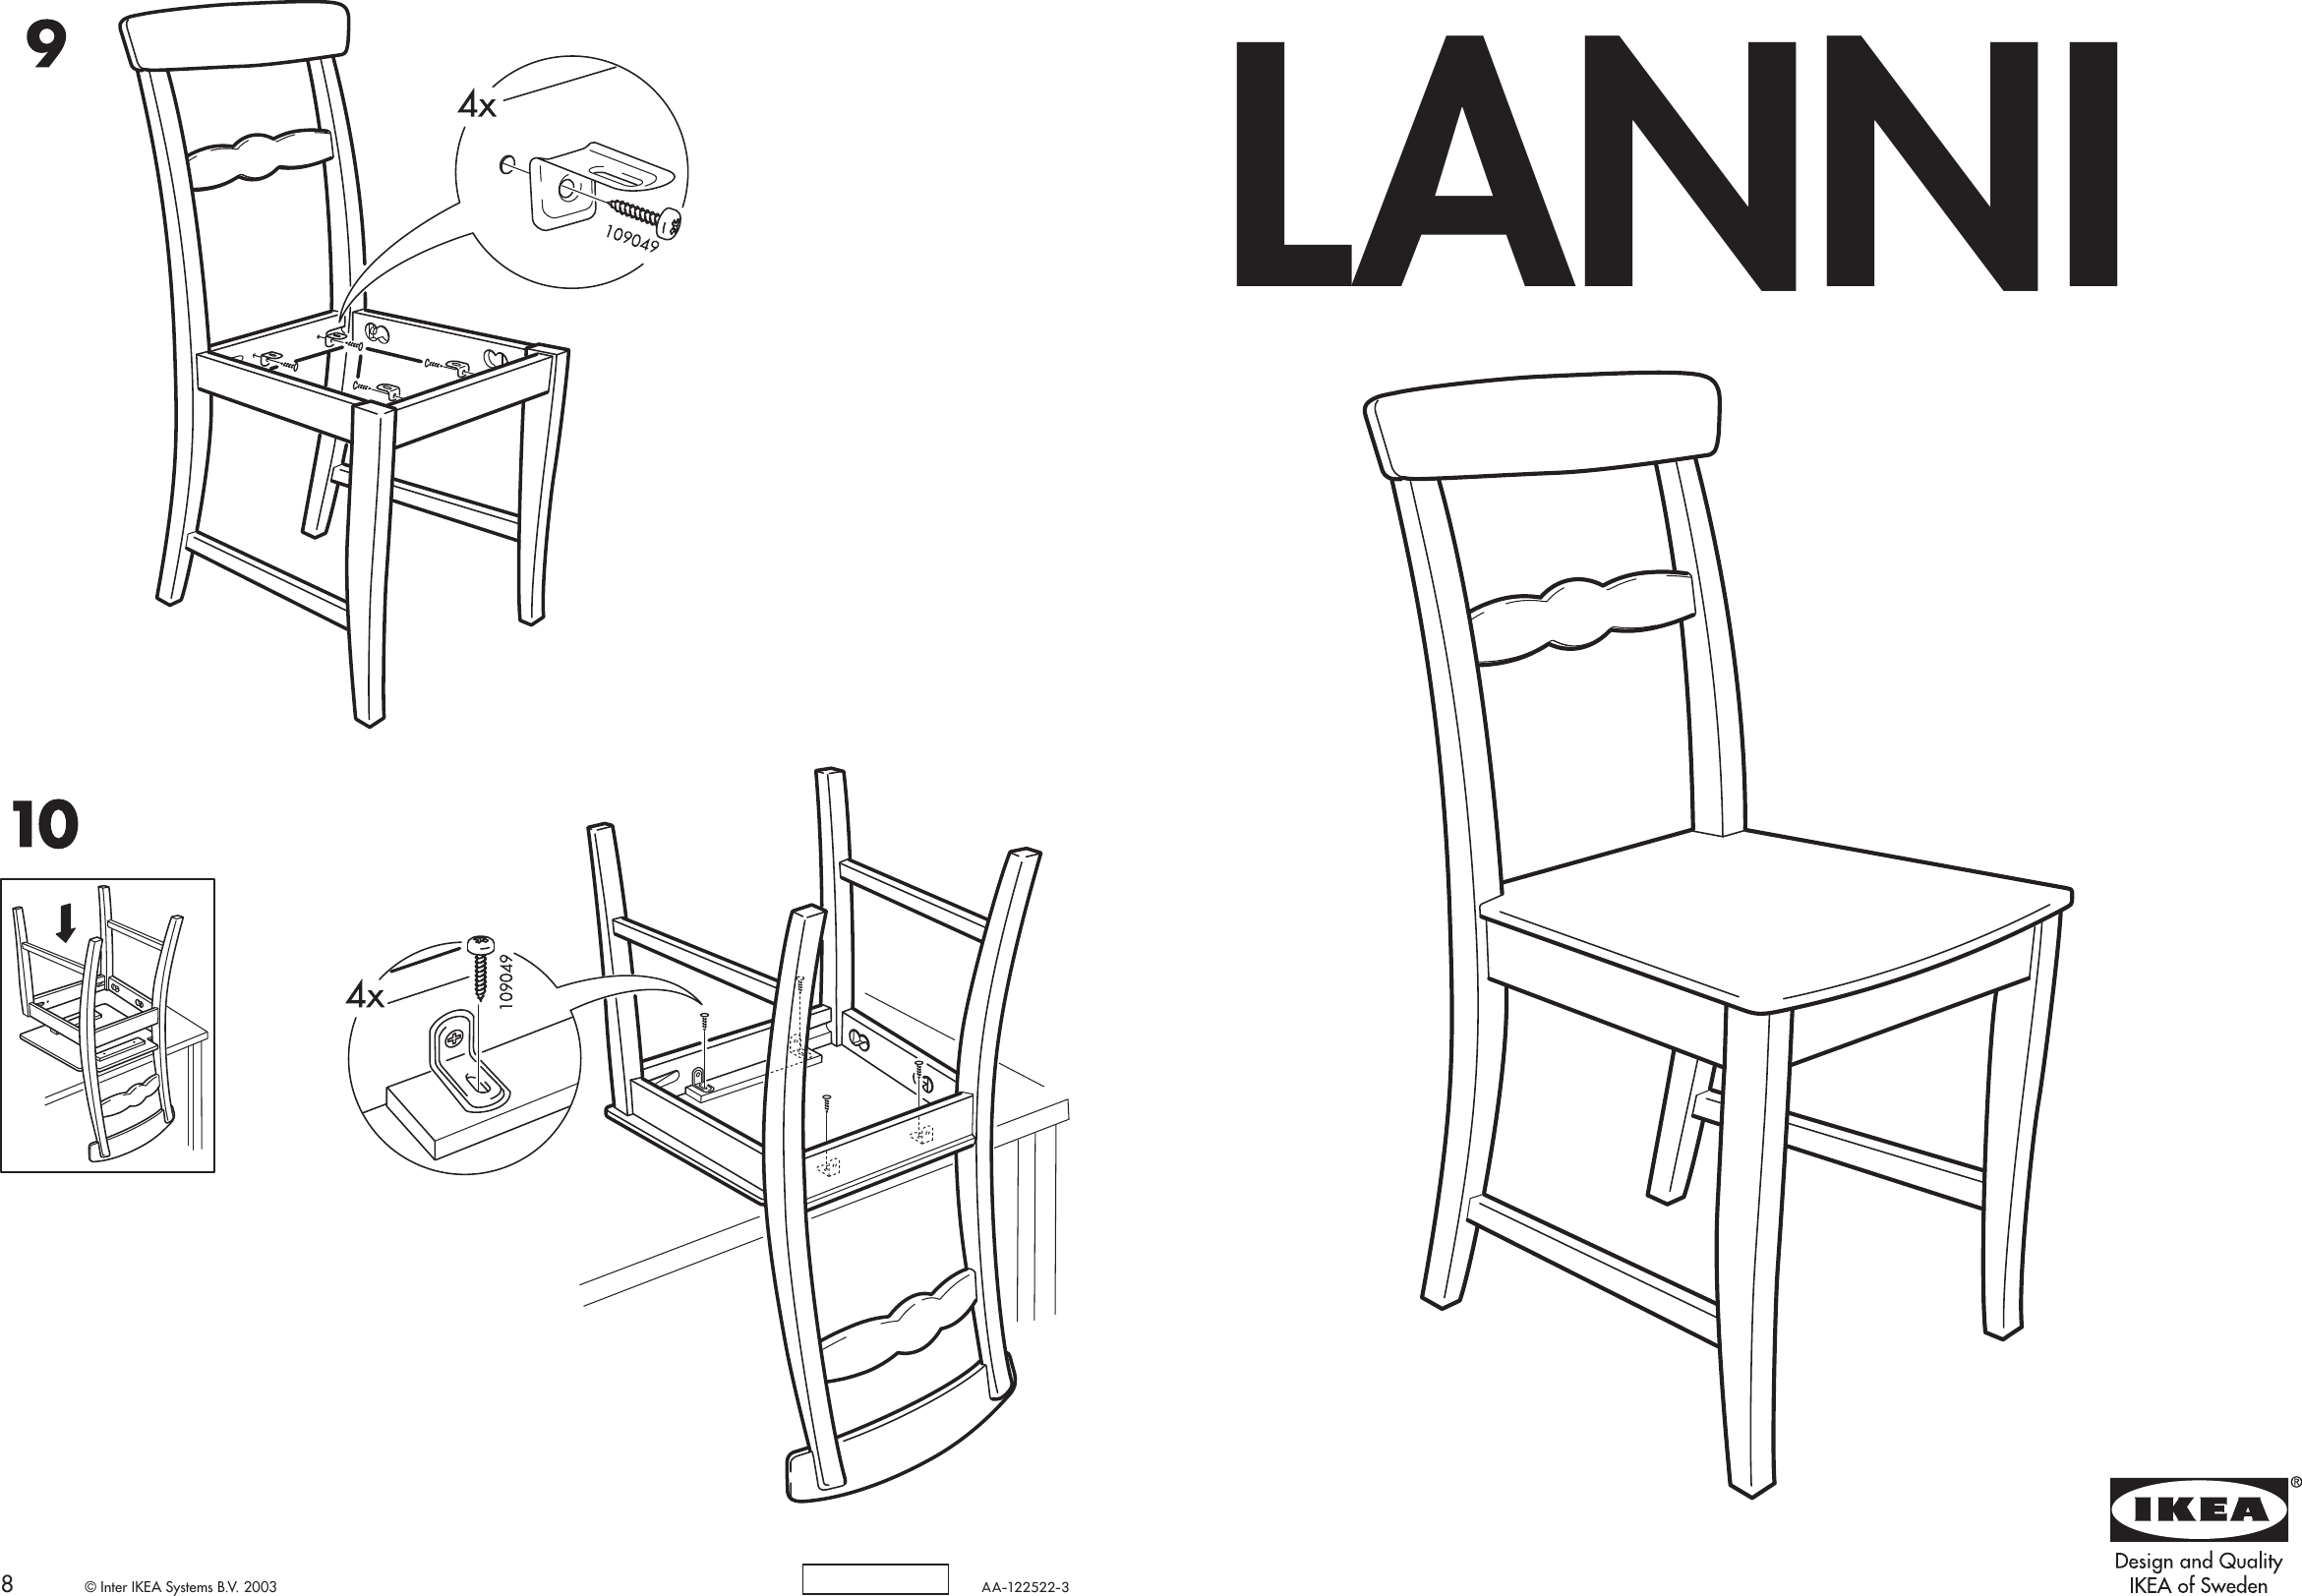 Page 1 of 4 - Ikea Ikea-Lanni-Chair-Assembly-Instruction